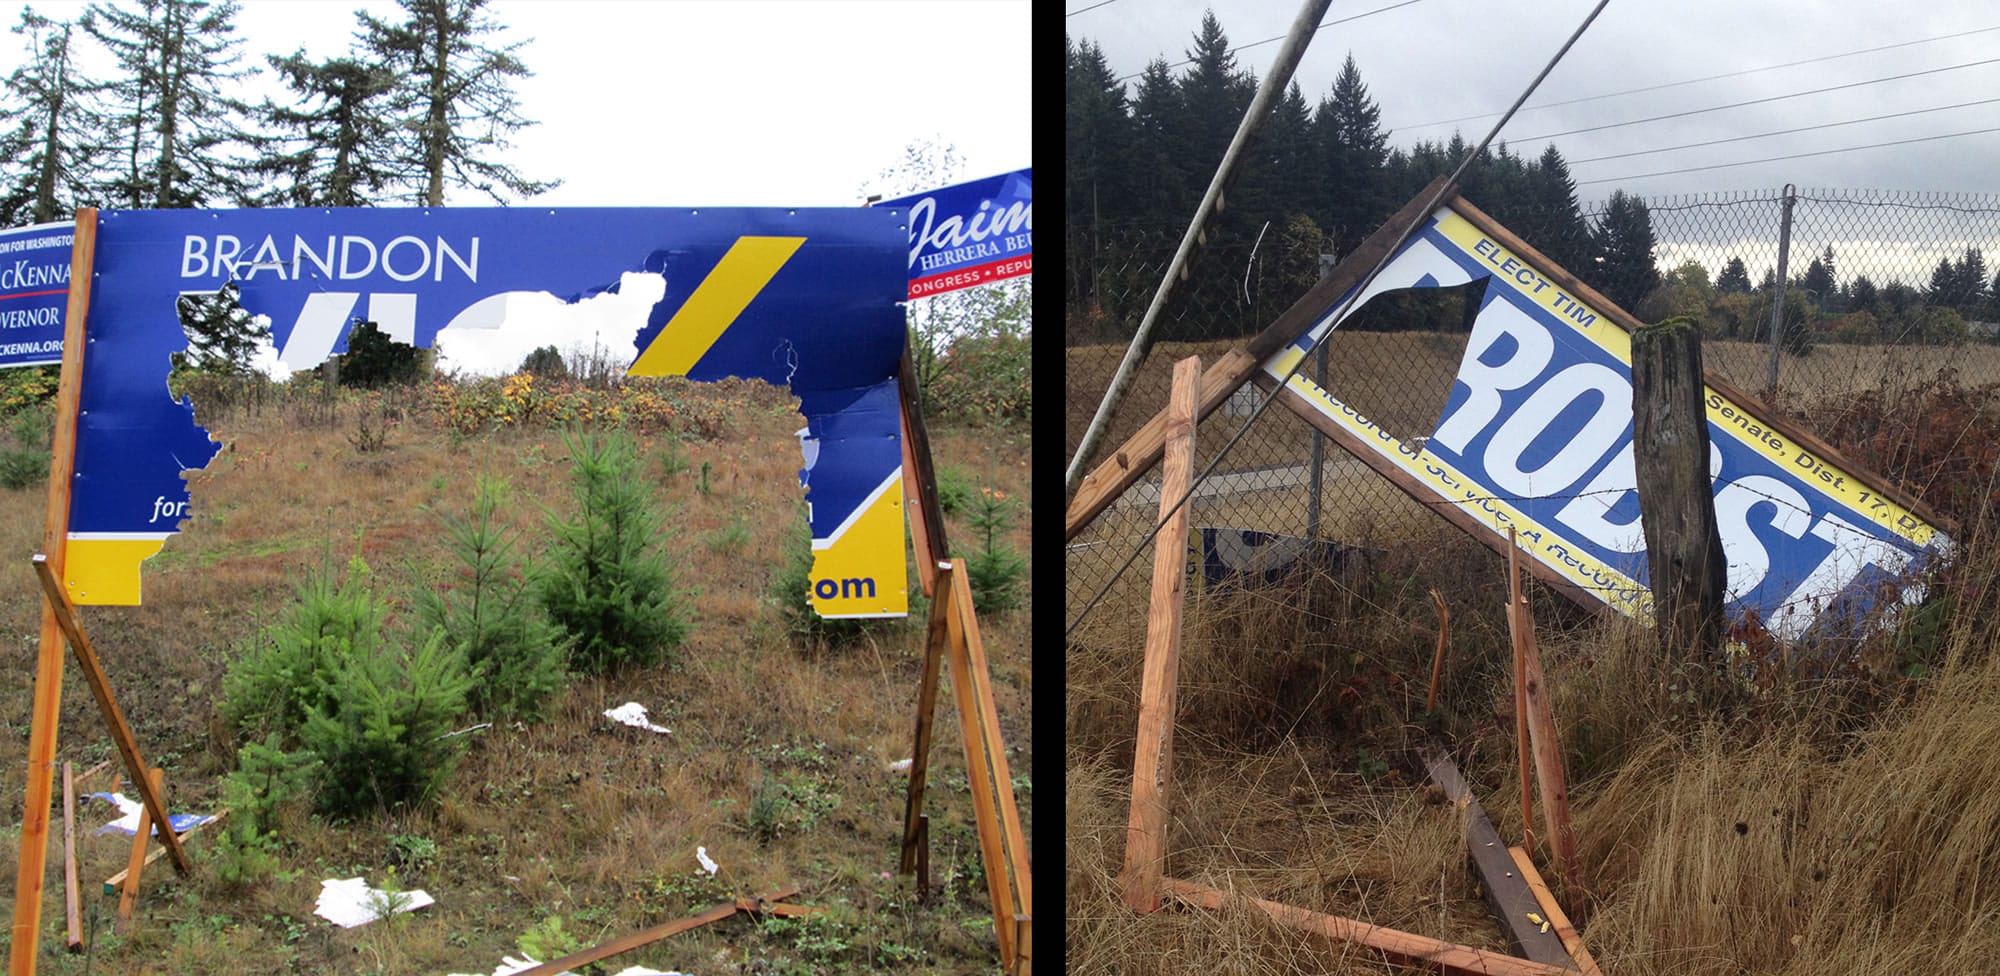 Campaign signs for Republican candidate Brandon Vick were cut and torn down along Interstate 5 in the Salmon Creek area.